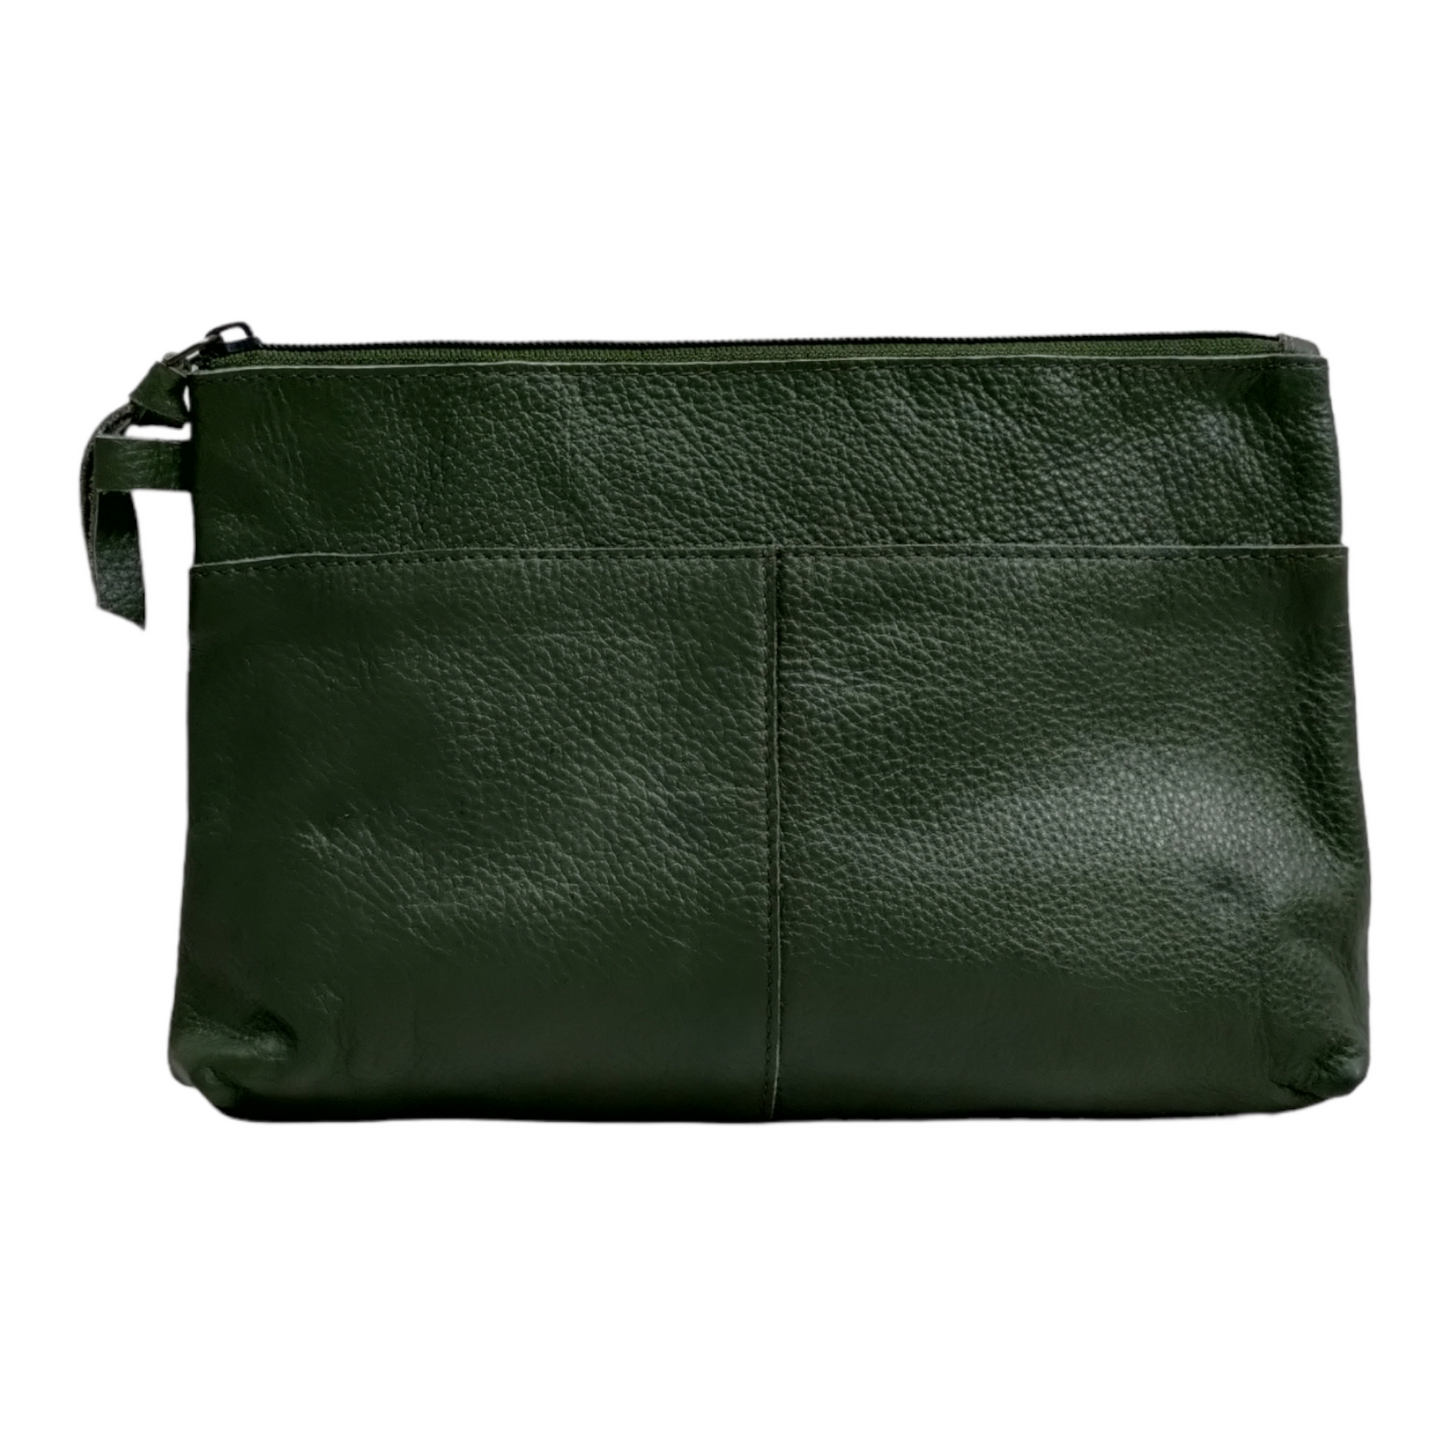 Green Leather Cosmetic Bag Leather Zipper Pouch Leather Make Up Bag Leather Toiletry Kit bag